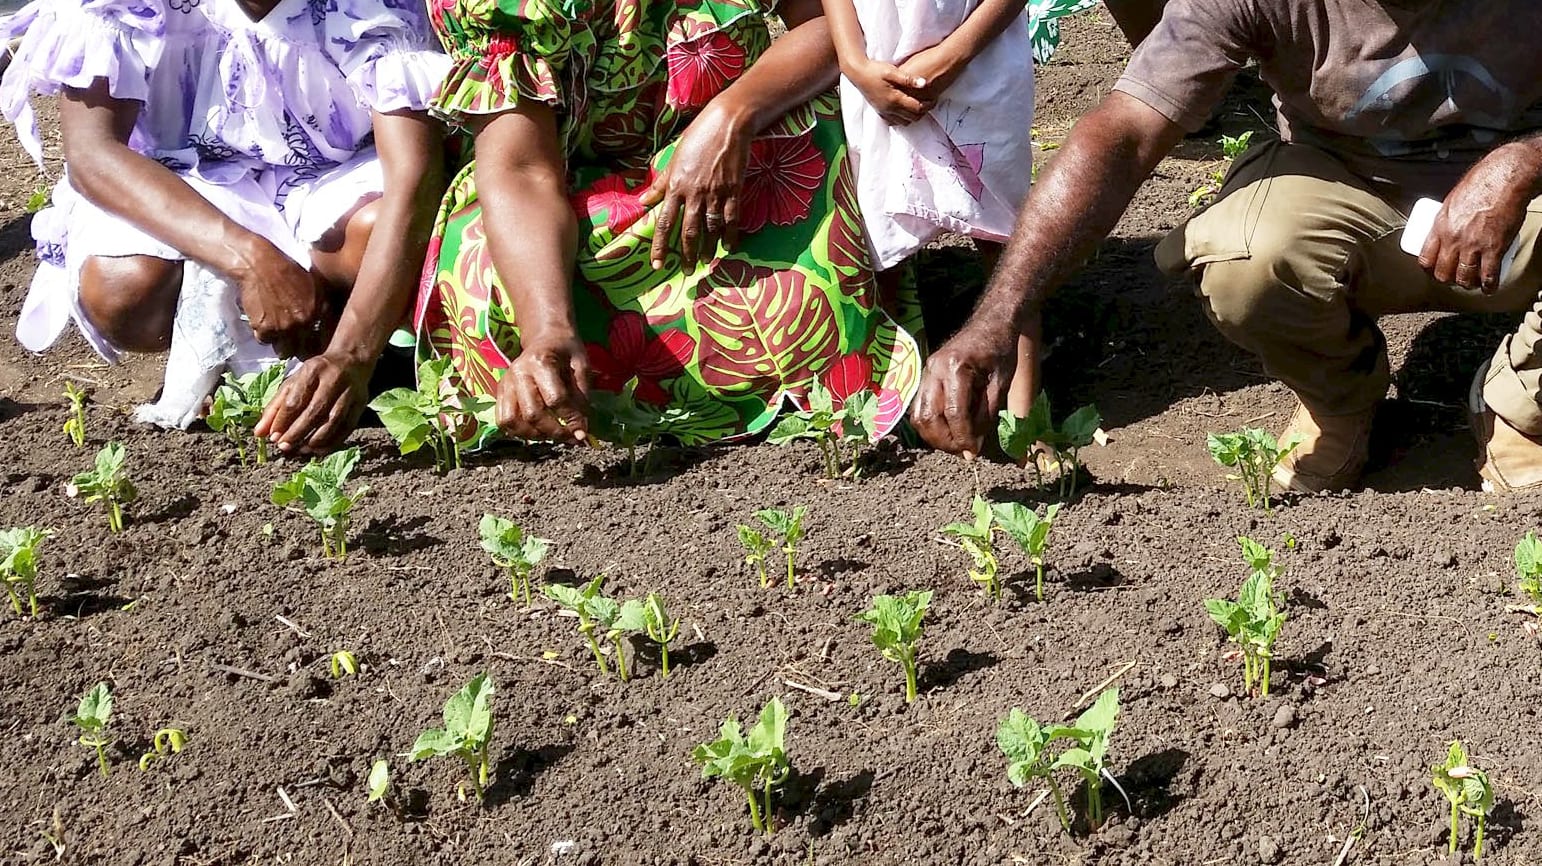 UNDP supported programme in Vanuatu to share farming techniques to improve resilience to climate change. Aug 2015.